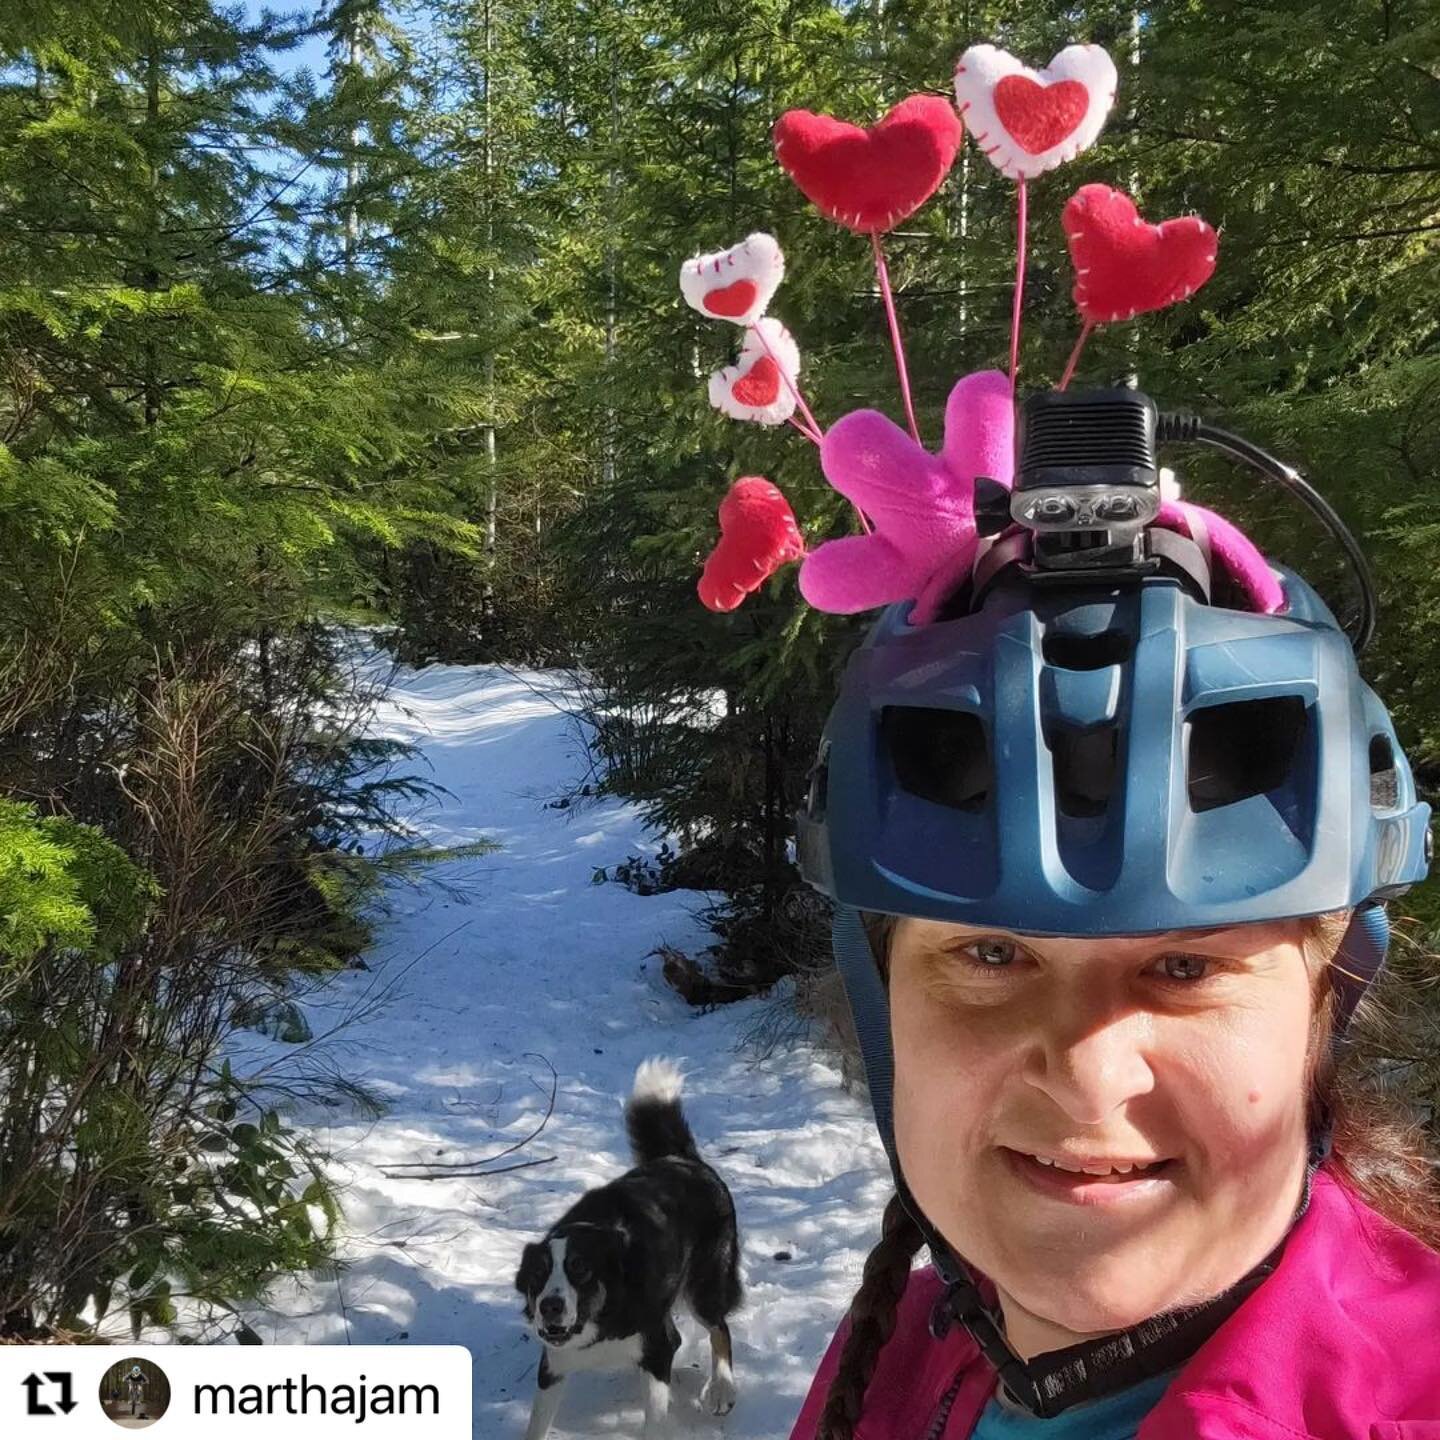 #Repost @marthajam with @use.repost
・・・
This week's trail report on the Pumphouse: 80% clear of snow. The snow that is covering the trail is thick and rotten. 50% able to ride/slip through. Don't ride up the inside. Just don't.
 Stick to Dean Martin.